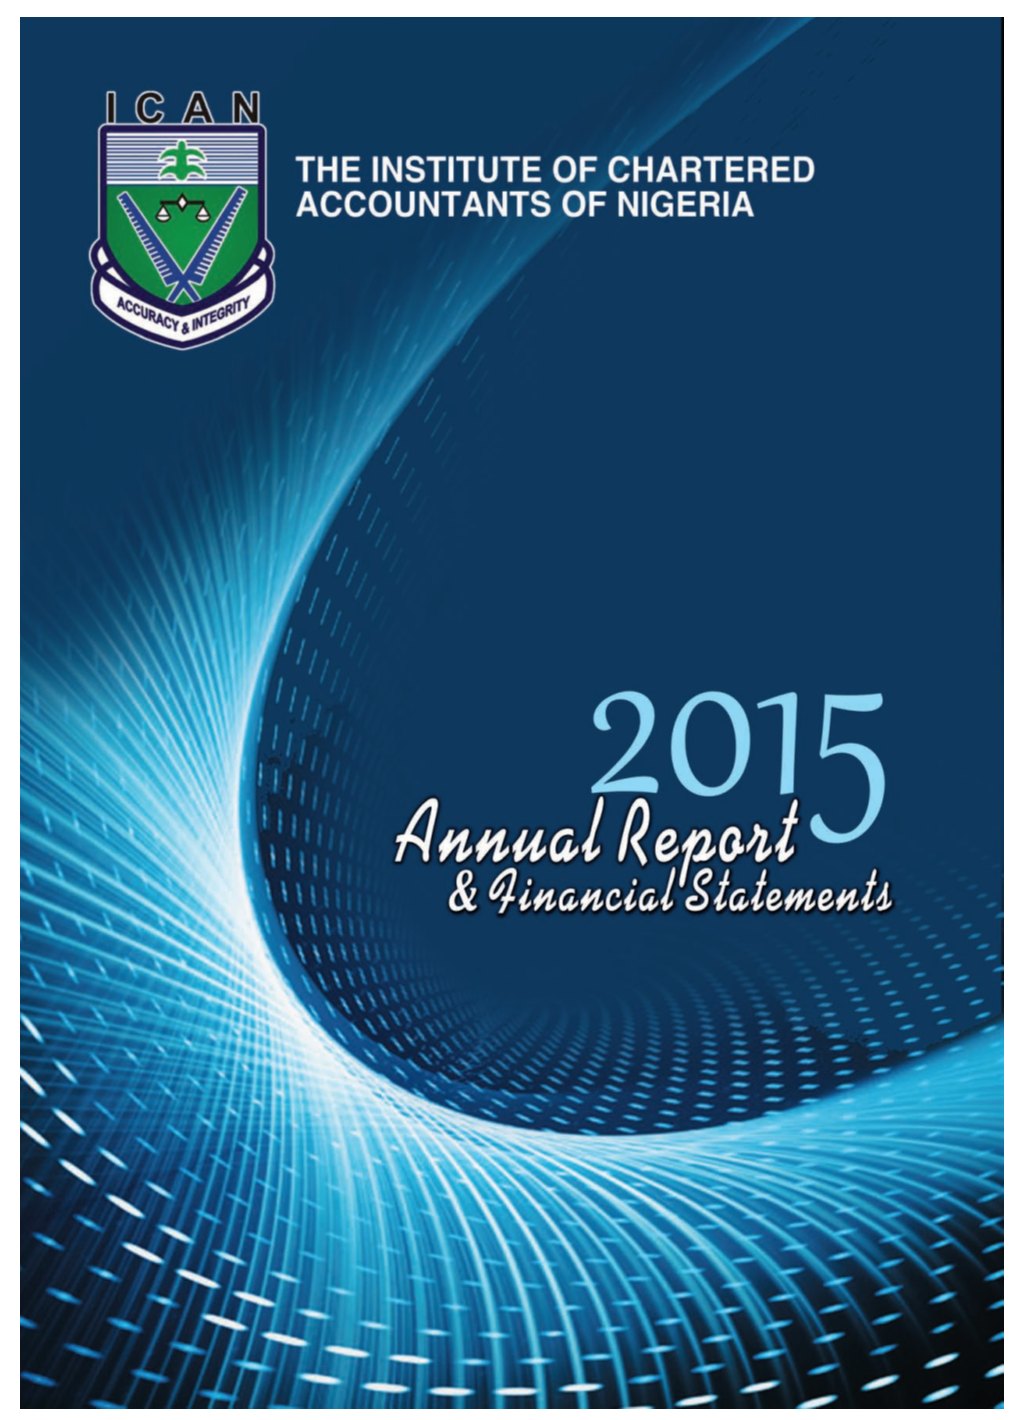 ICAN 2015 Annual Report